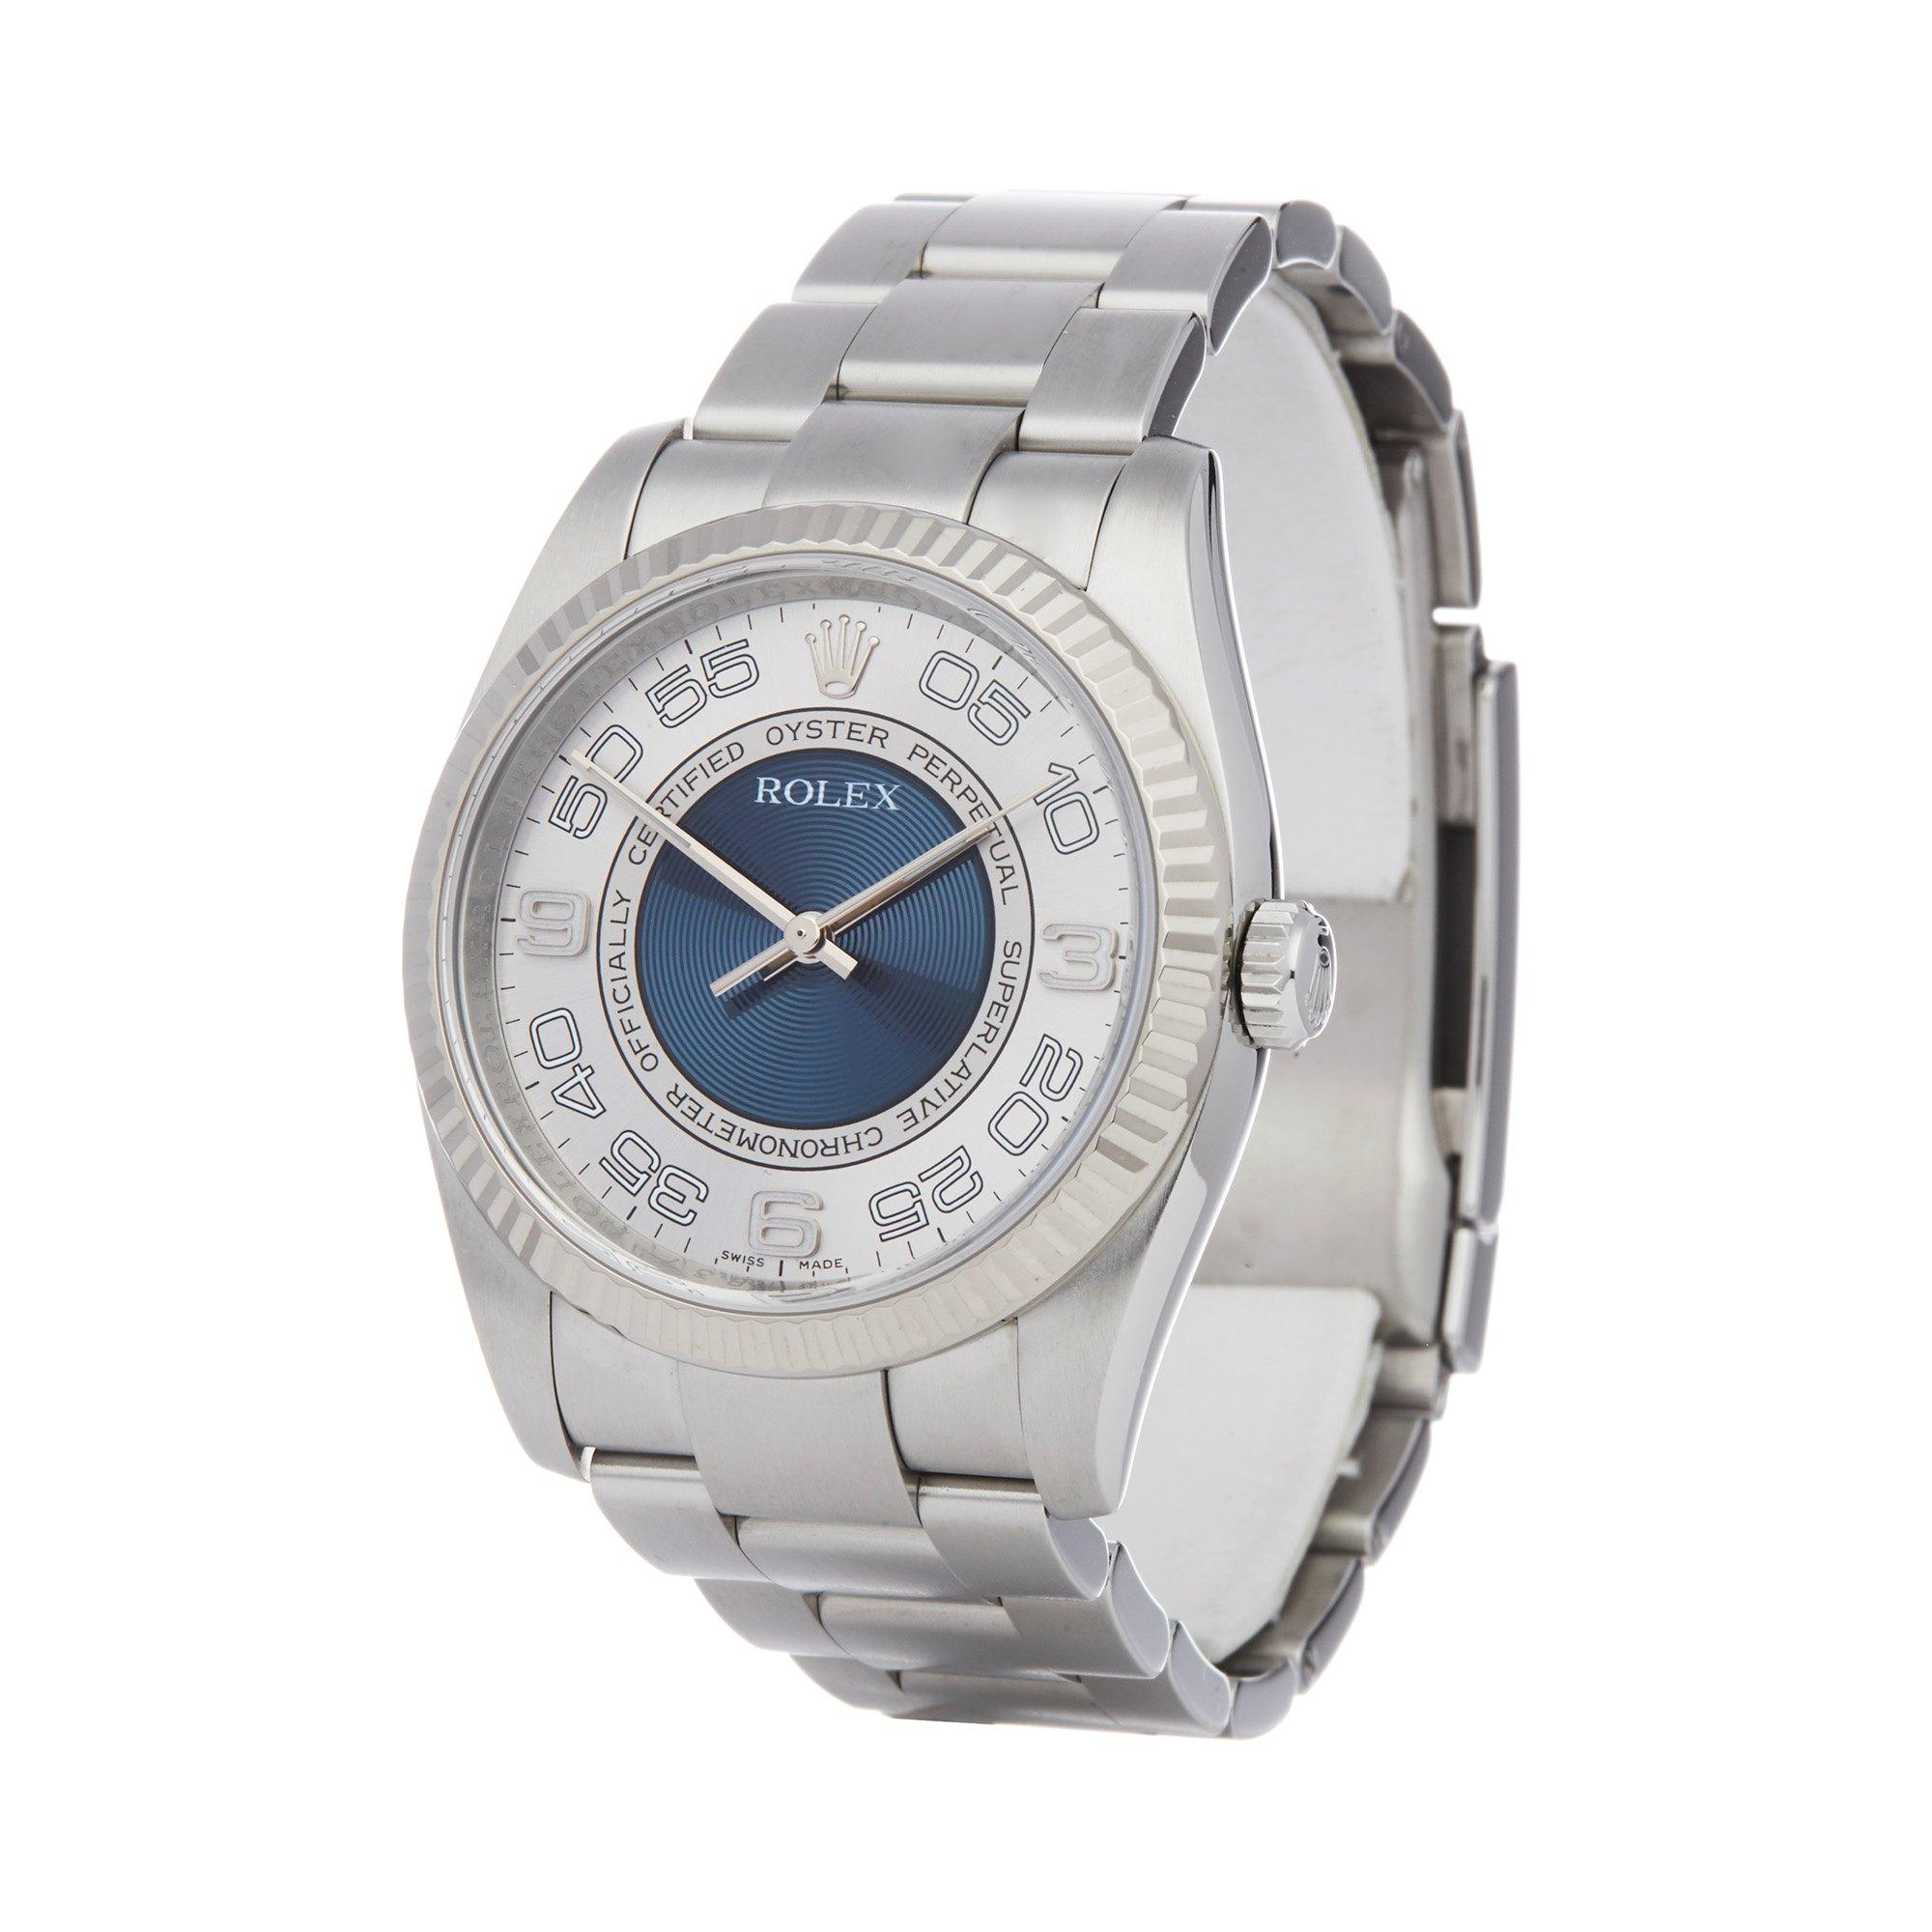 Xupes Reference: W007423
Manufacturer: Rolex
Model: Oyster Perpetual
Model Variant: 36
Model Number: 116034
Age: 2009
Gender: Unisex
Complete With: Rolex Box
Dial: Silver Arabic
Glass: Sapphire Crystal
Case Size: 36mm
Case Material: Stainless